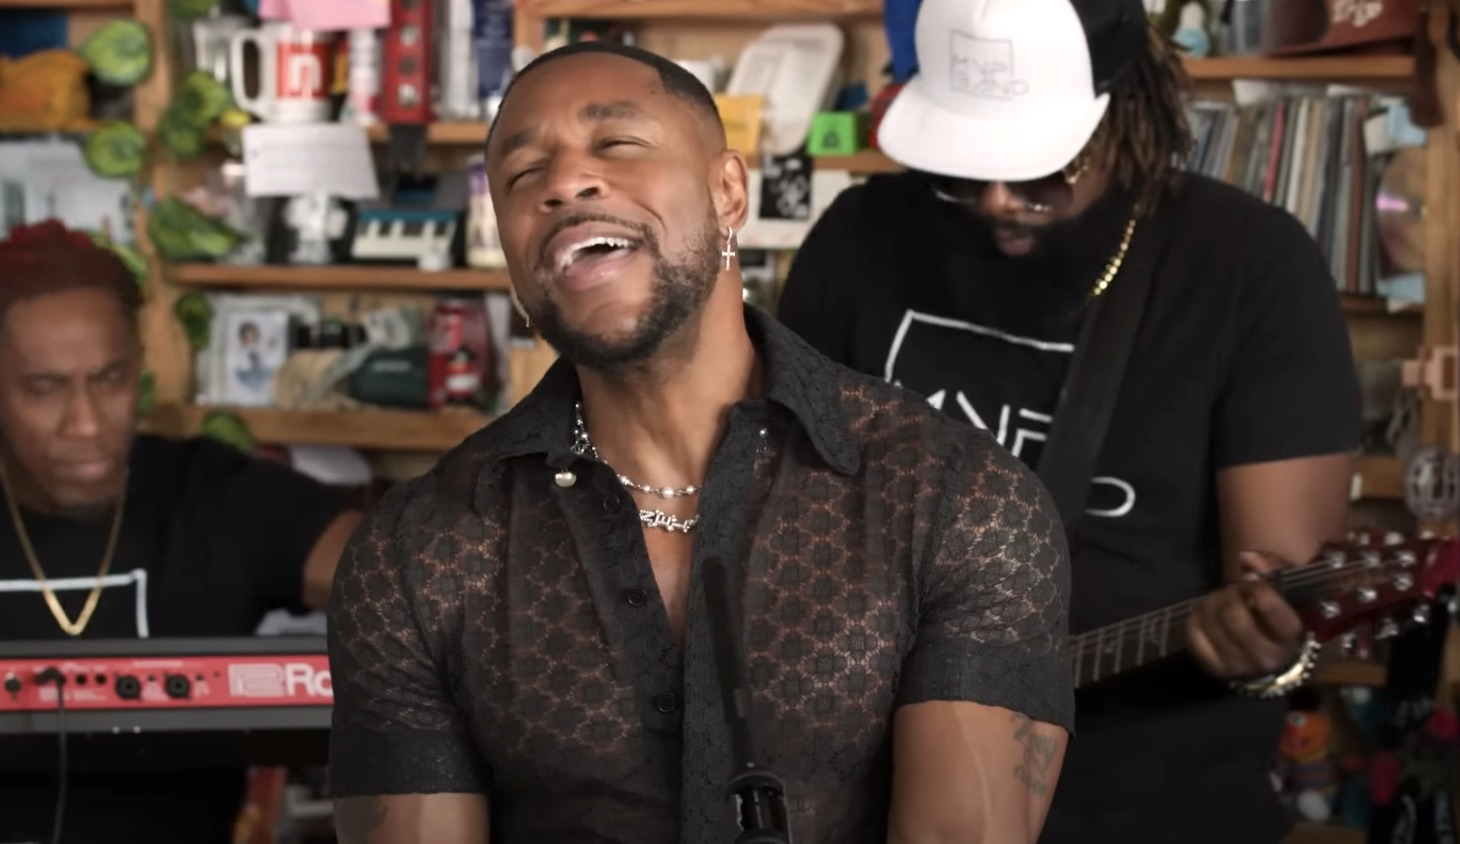 Tank Soars on Tiny Desk Concert / Wows with Hits of His Own & Those